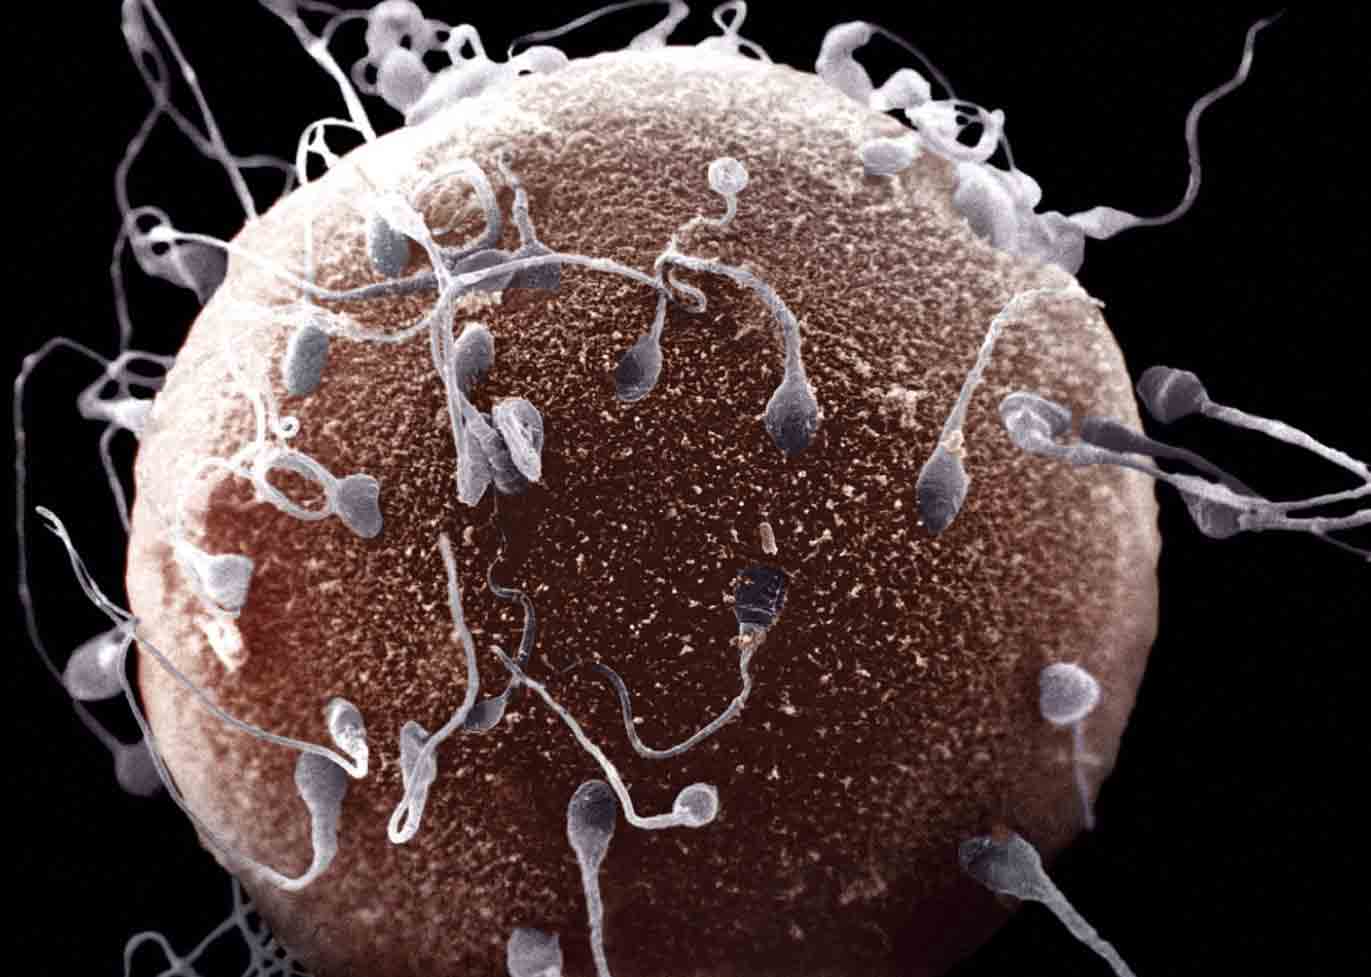 Challenging Mendel Does The Female Egg Woo Sperm With Specific Genes